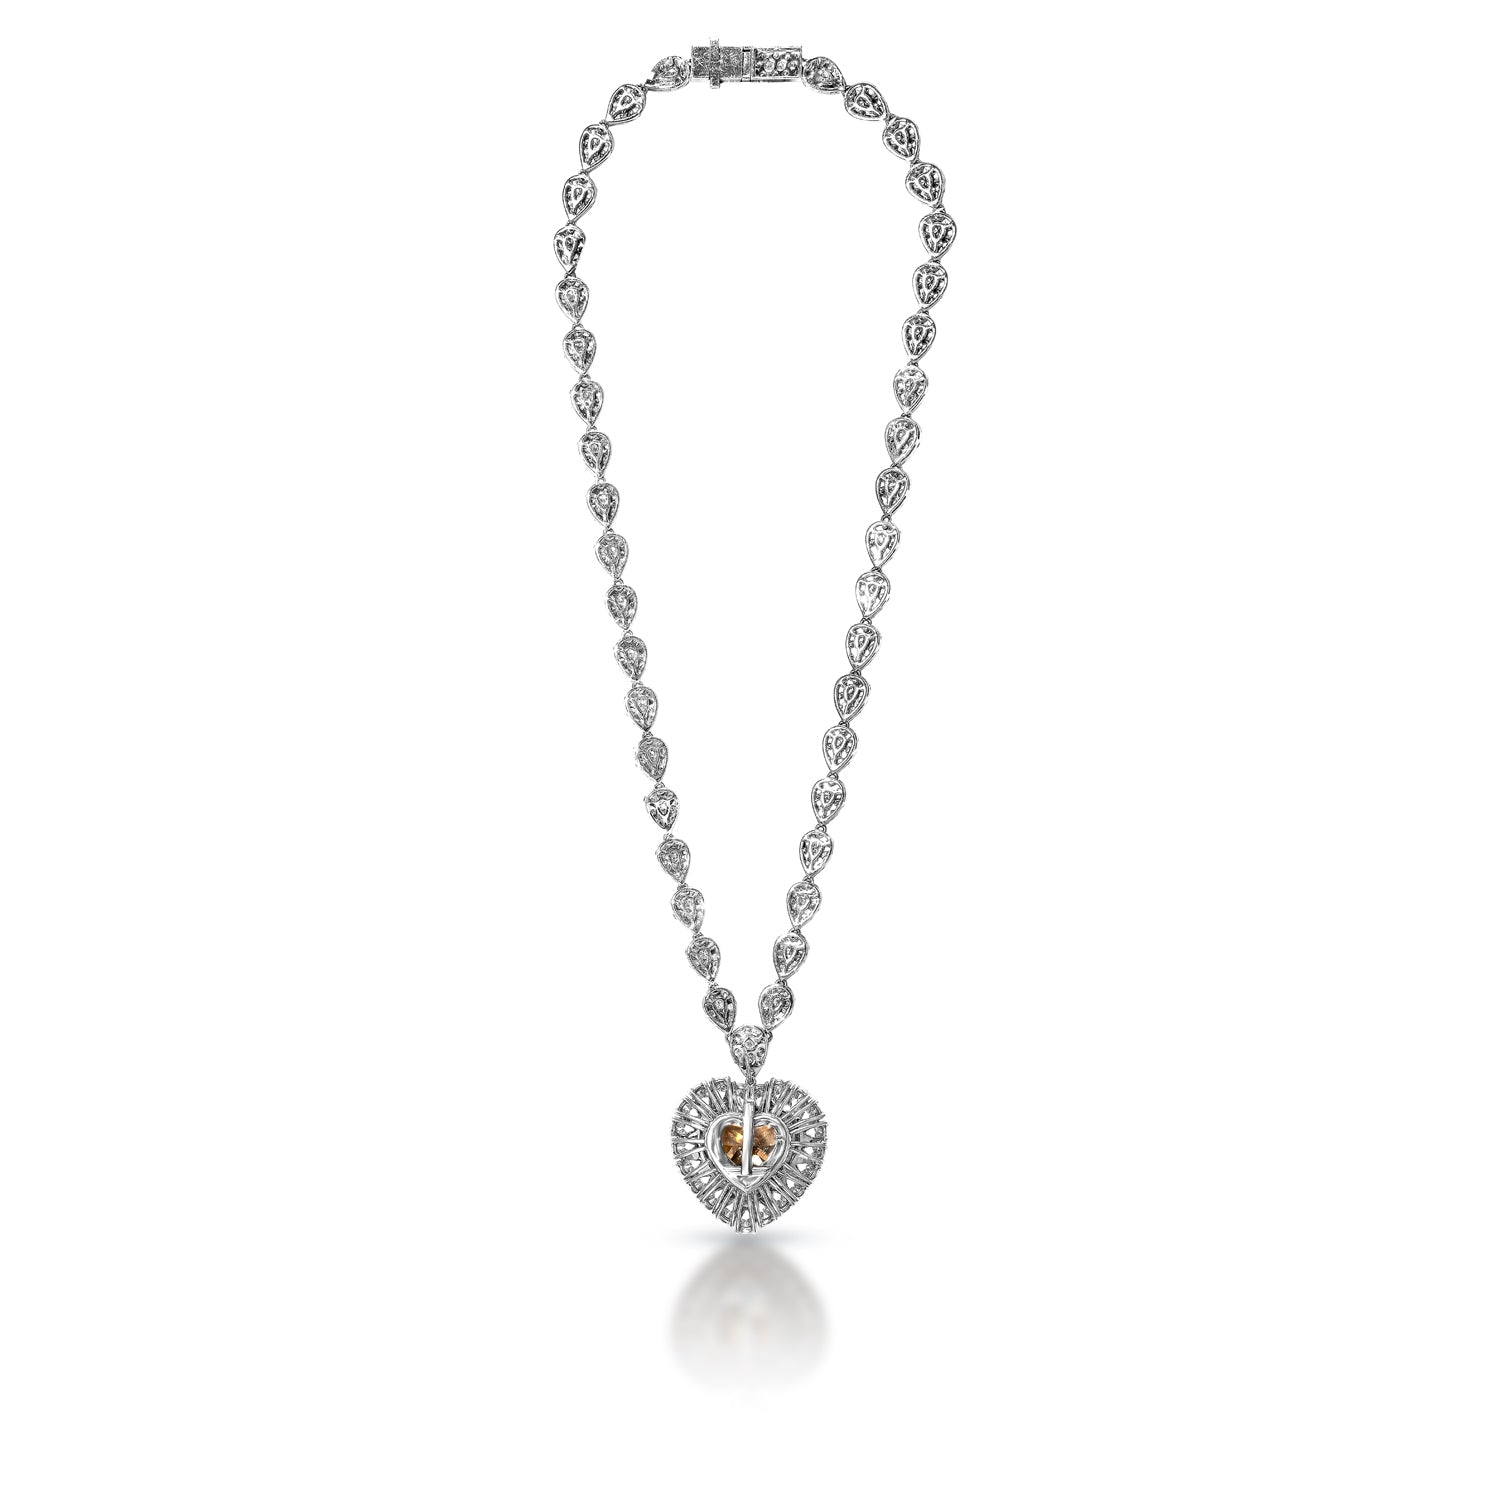 Remy 21 Carat Round Brilliant Diamond Pendant Necklace in 14k White Gold Back View